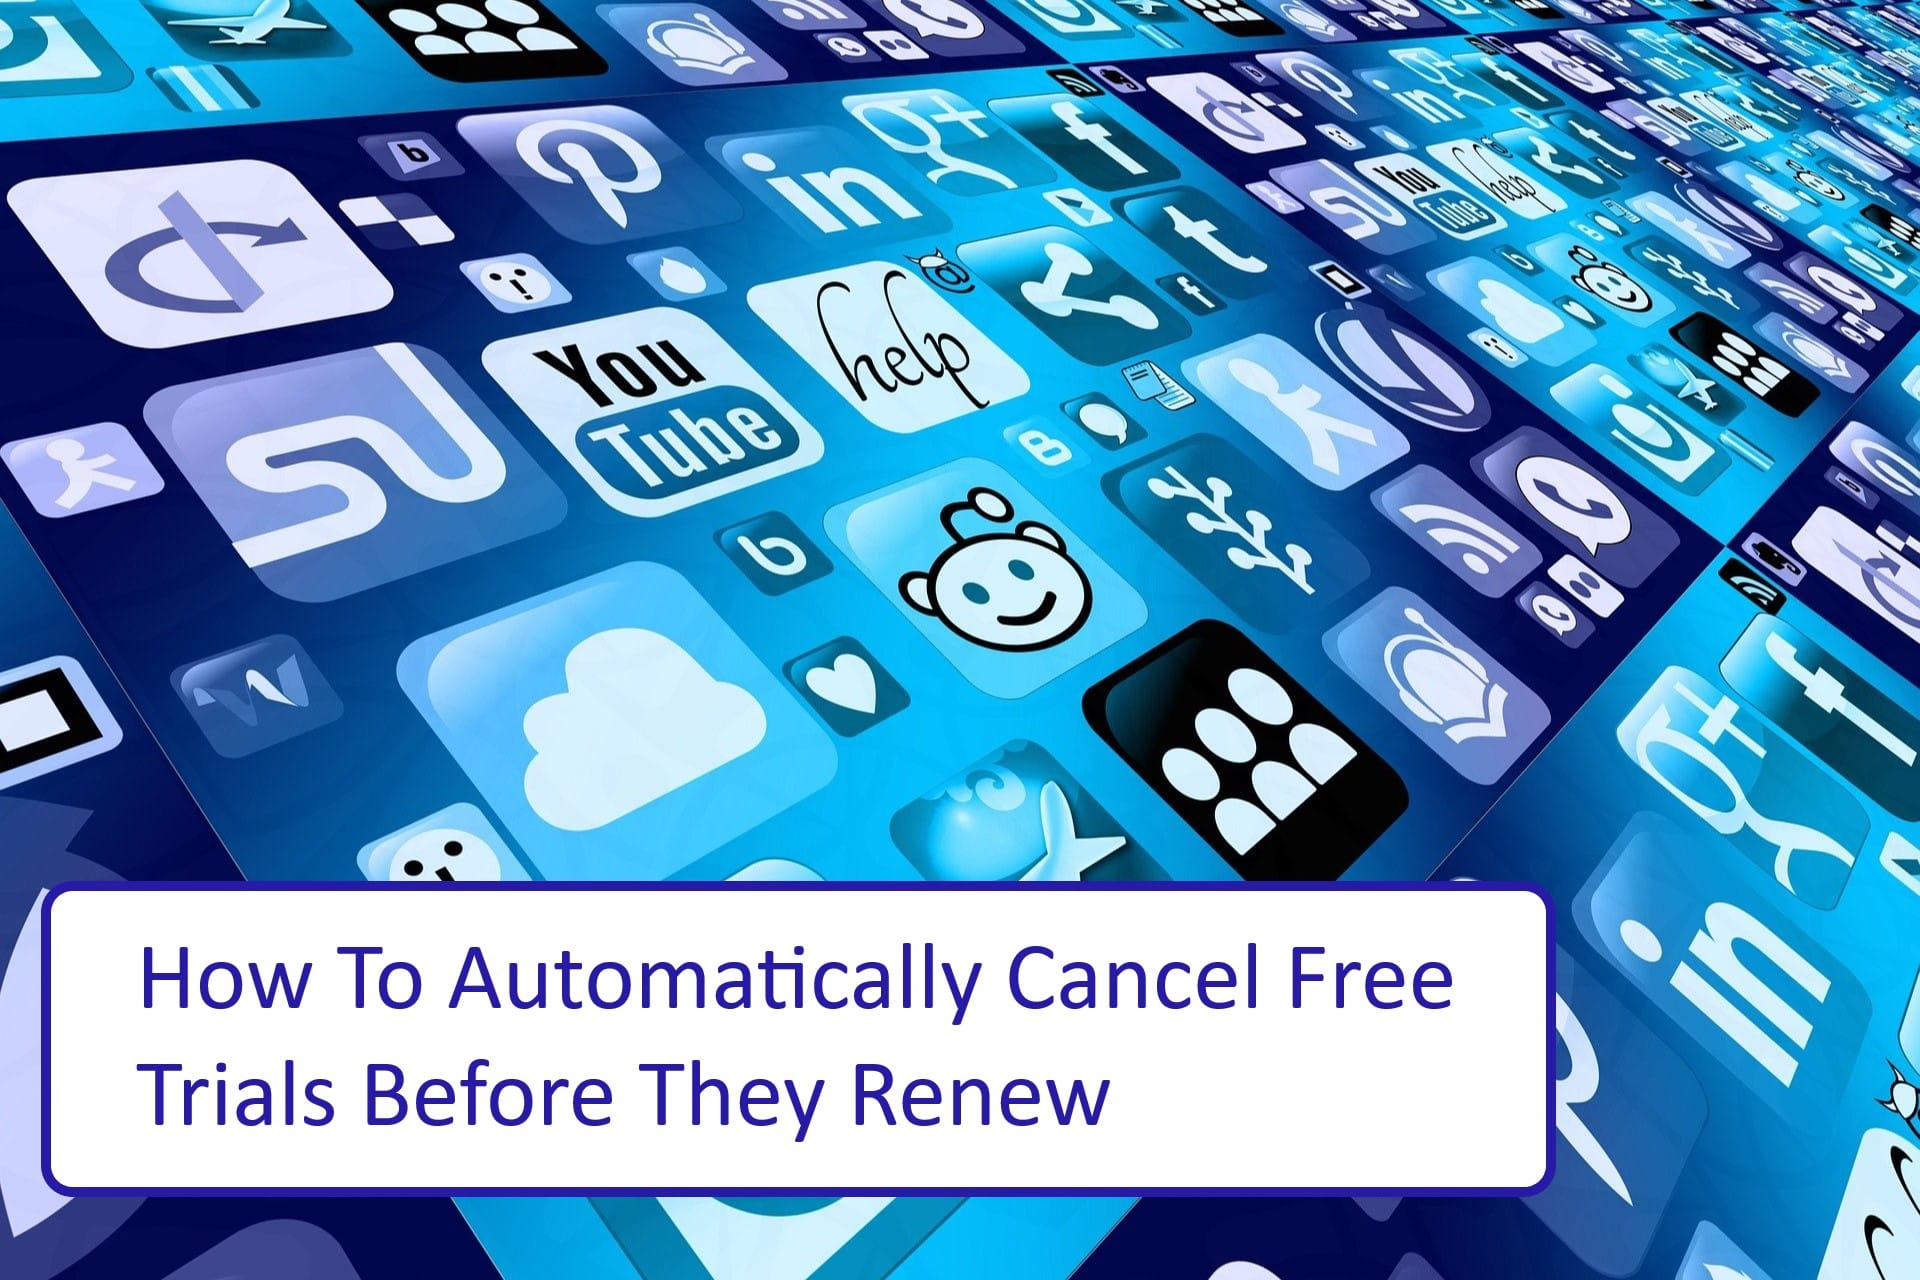 Free Trial Forgetfulness – How To Automatically Cancel Free Trials Before They Renew